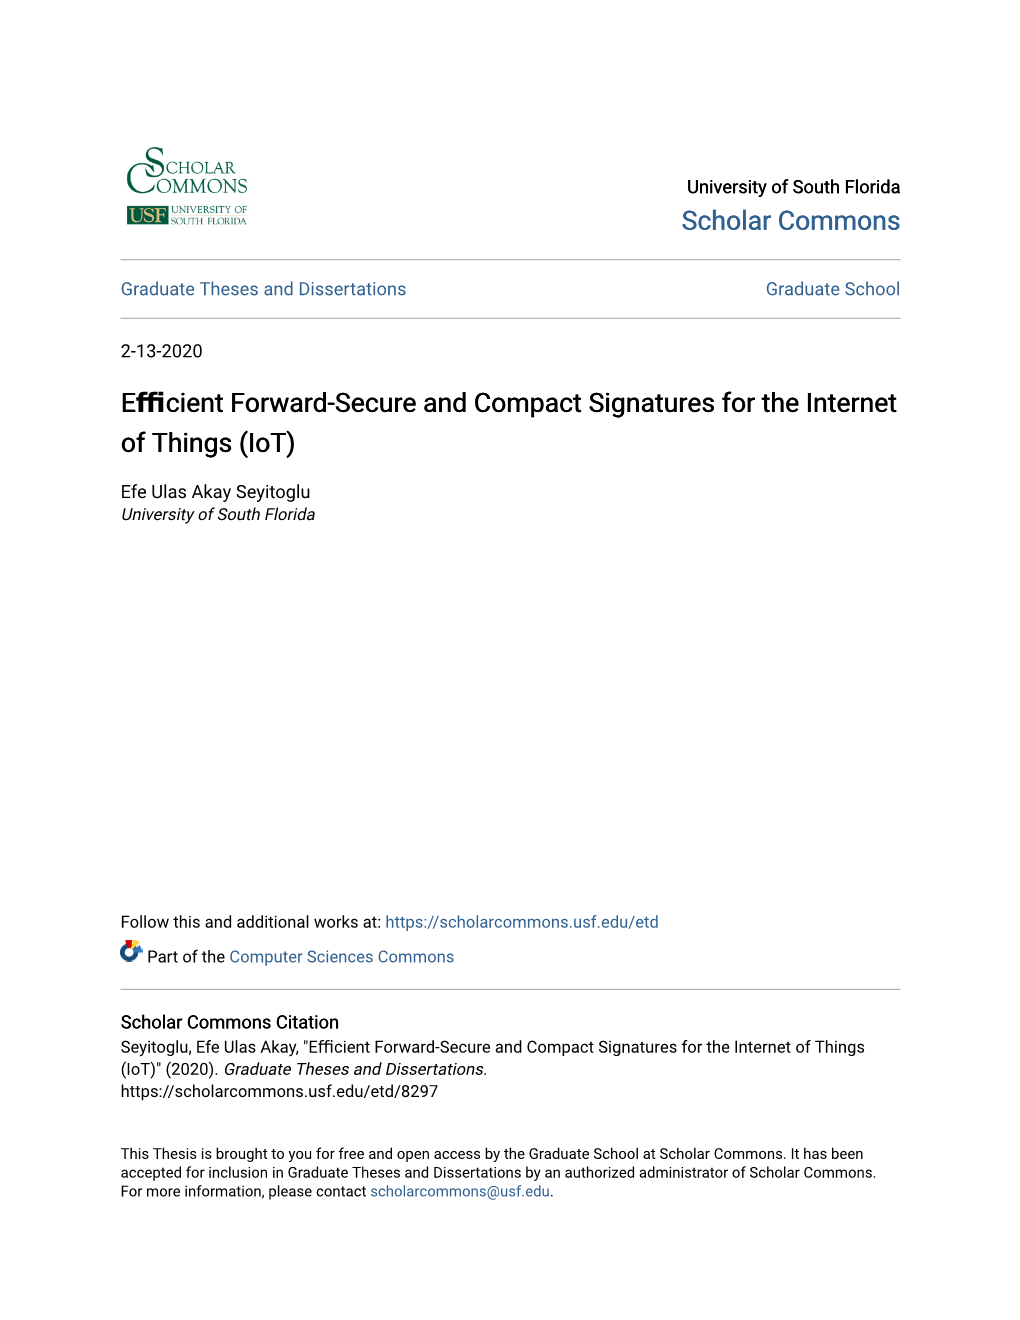 Eﬃcient Forward-Secure and Compact Signatures for the Internet of Things (Iot)